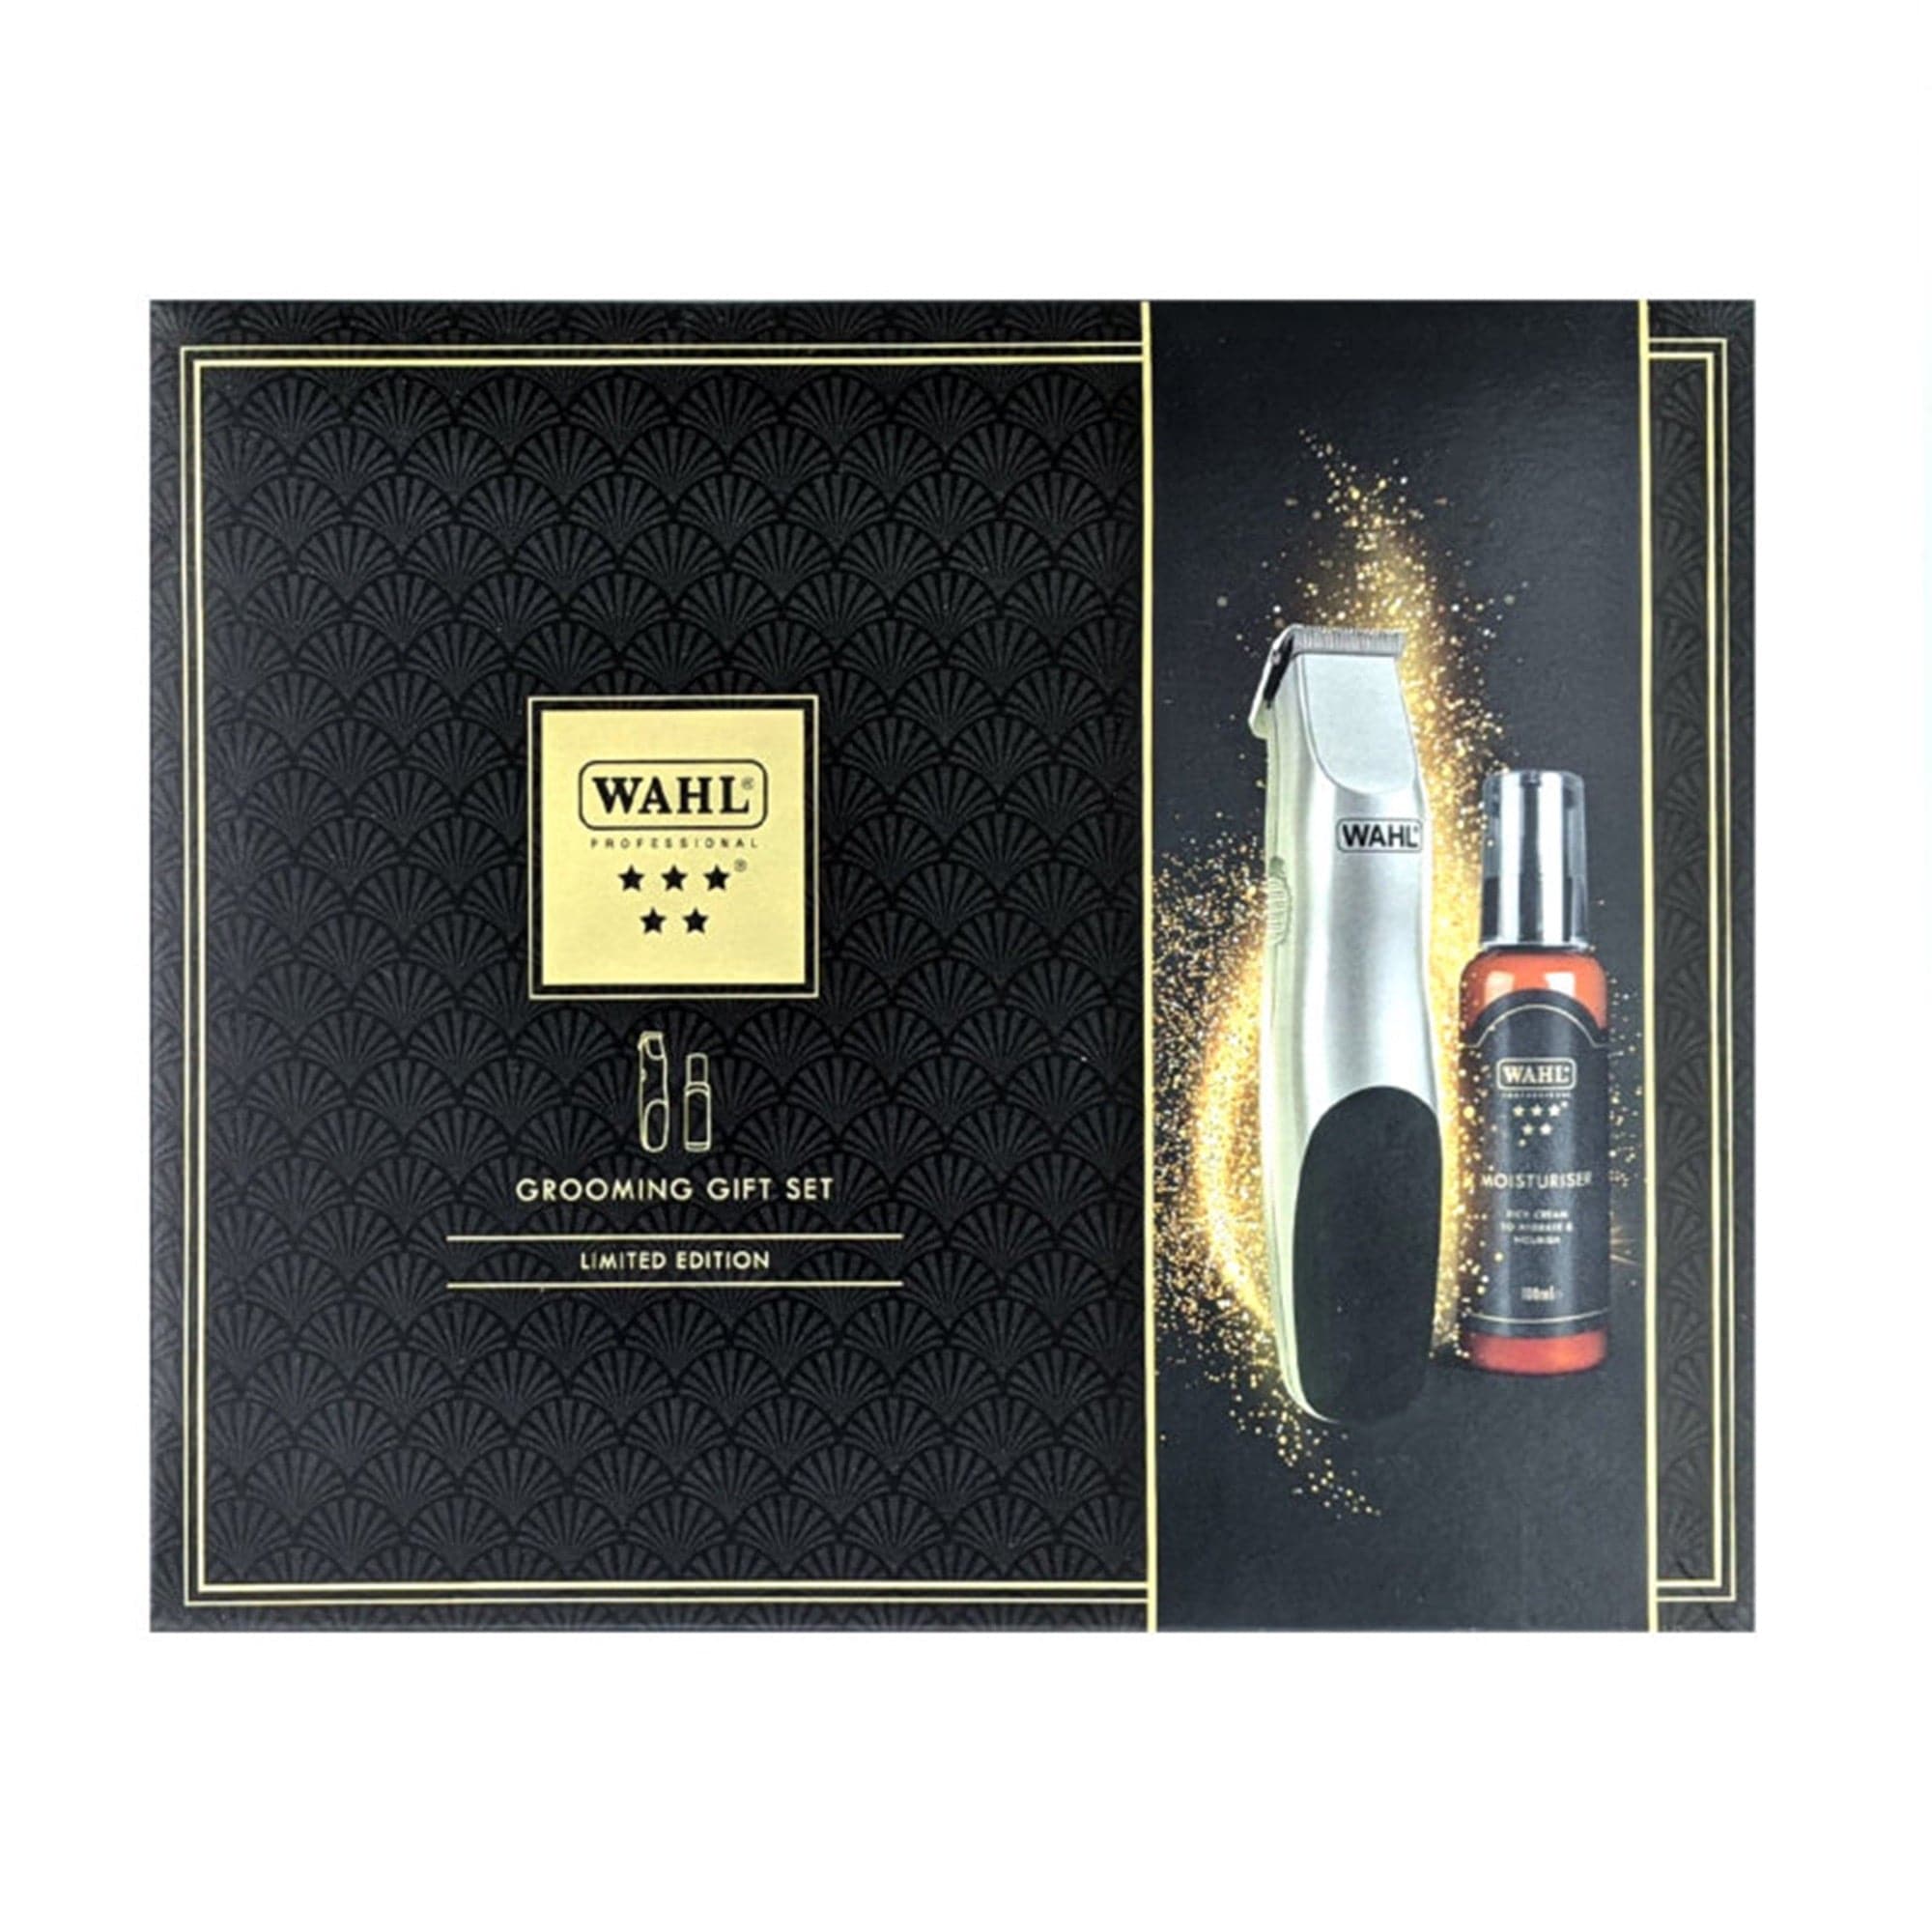 Wahl - 5 Star Grooming Gift Set Limited Edition